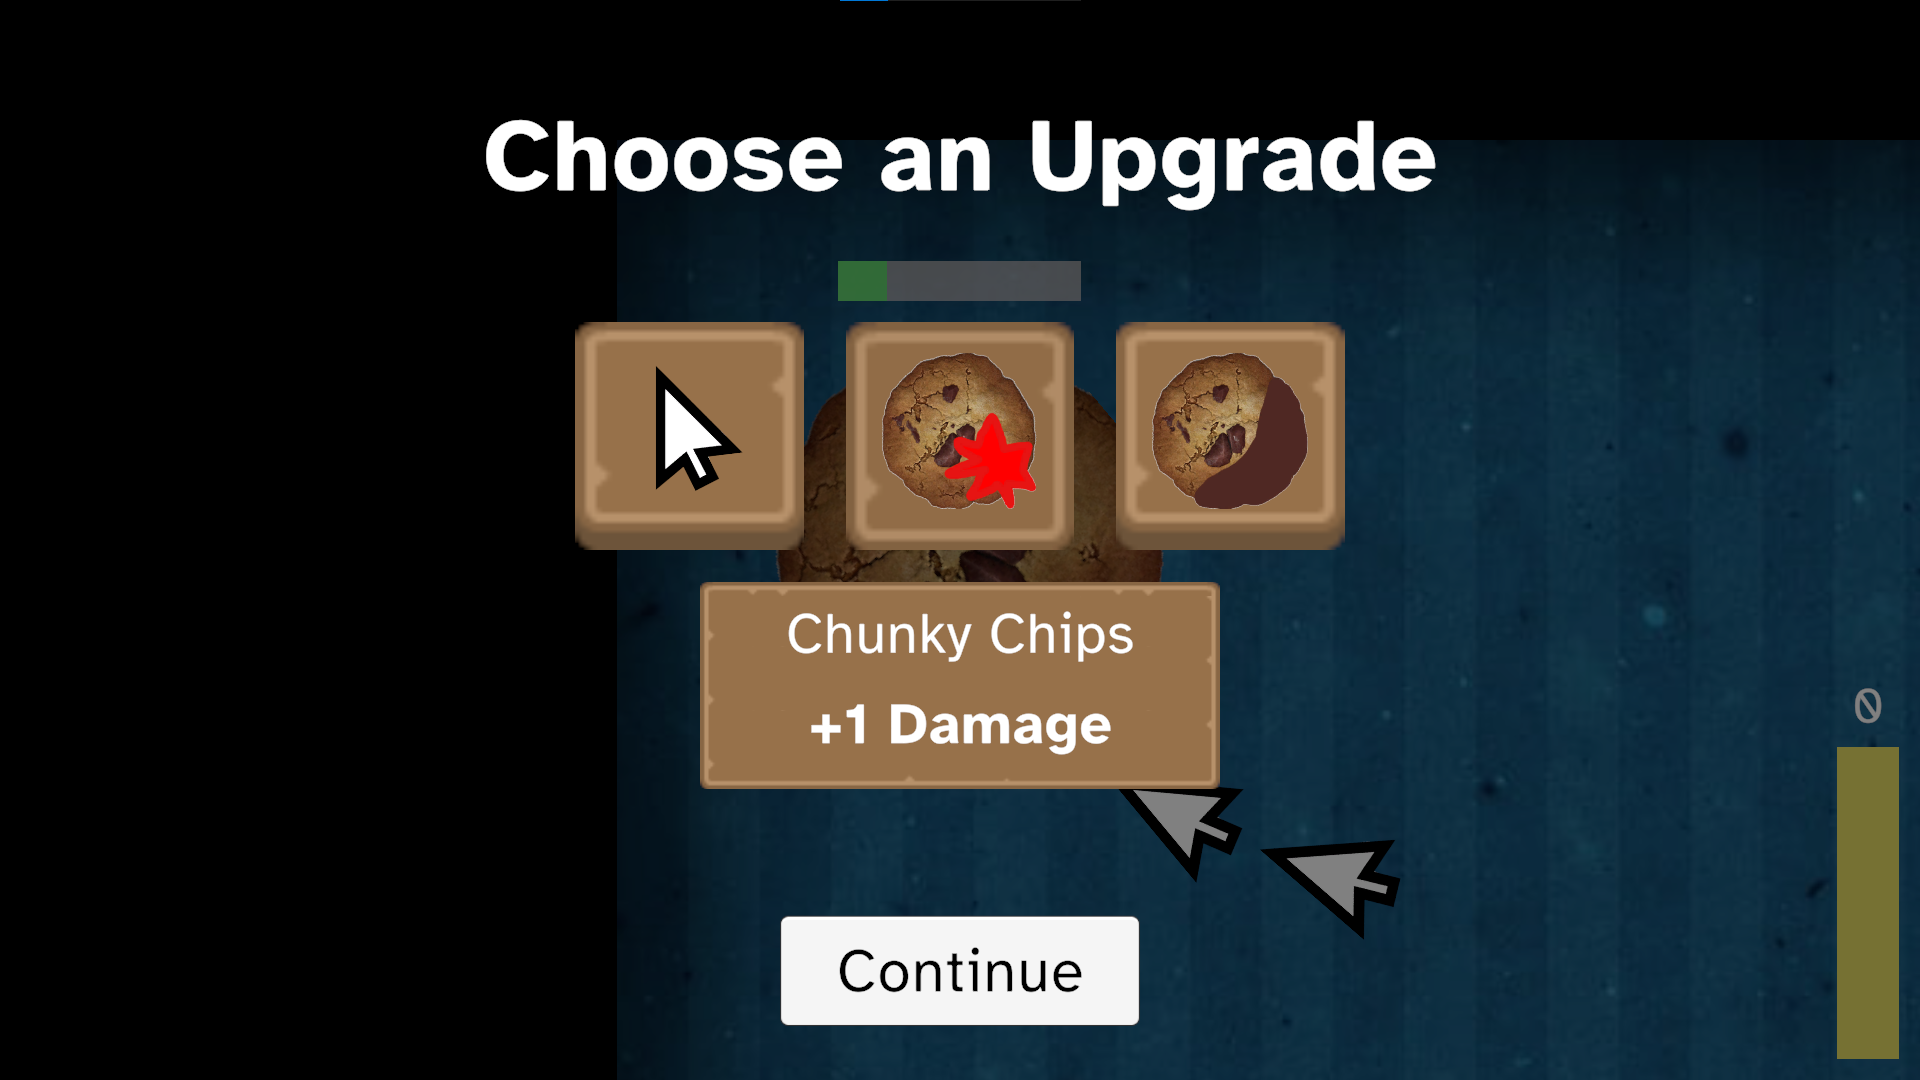 Reviewing Cookie Clicker is Probably the Only Way to Stop Playing